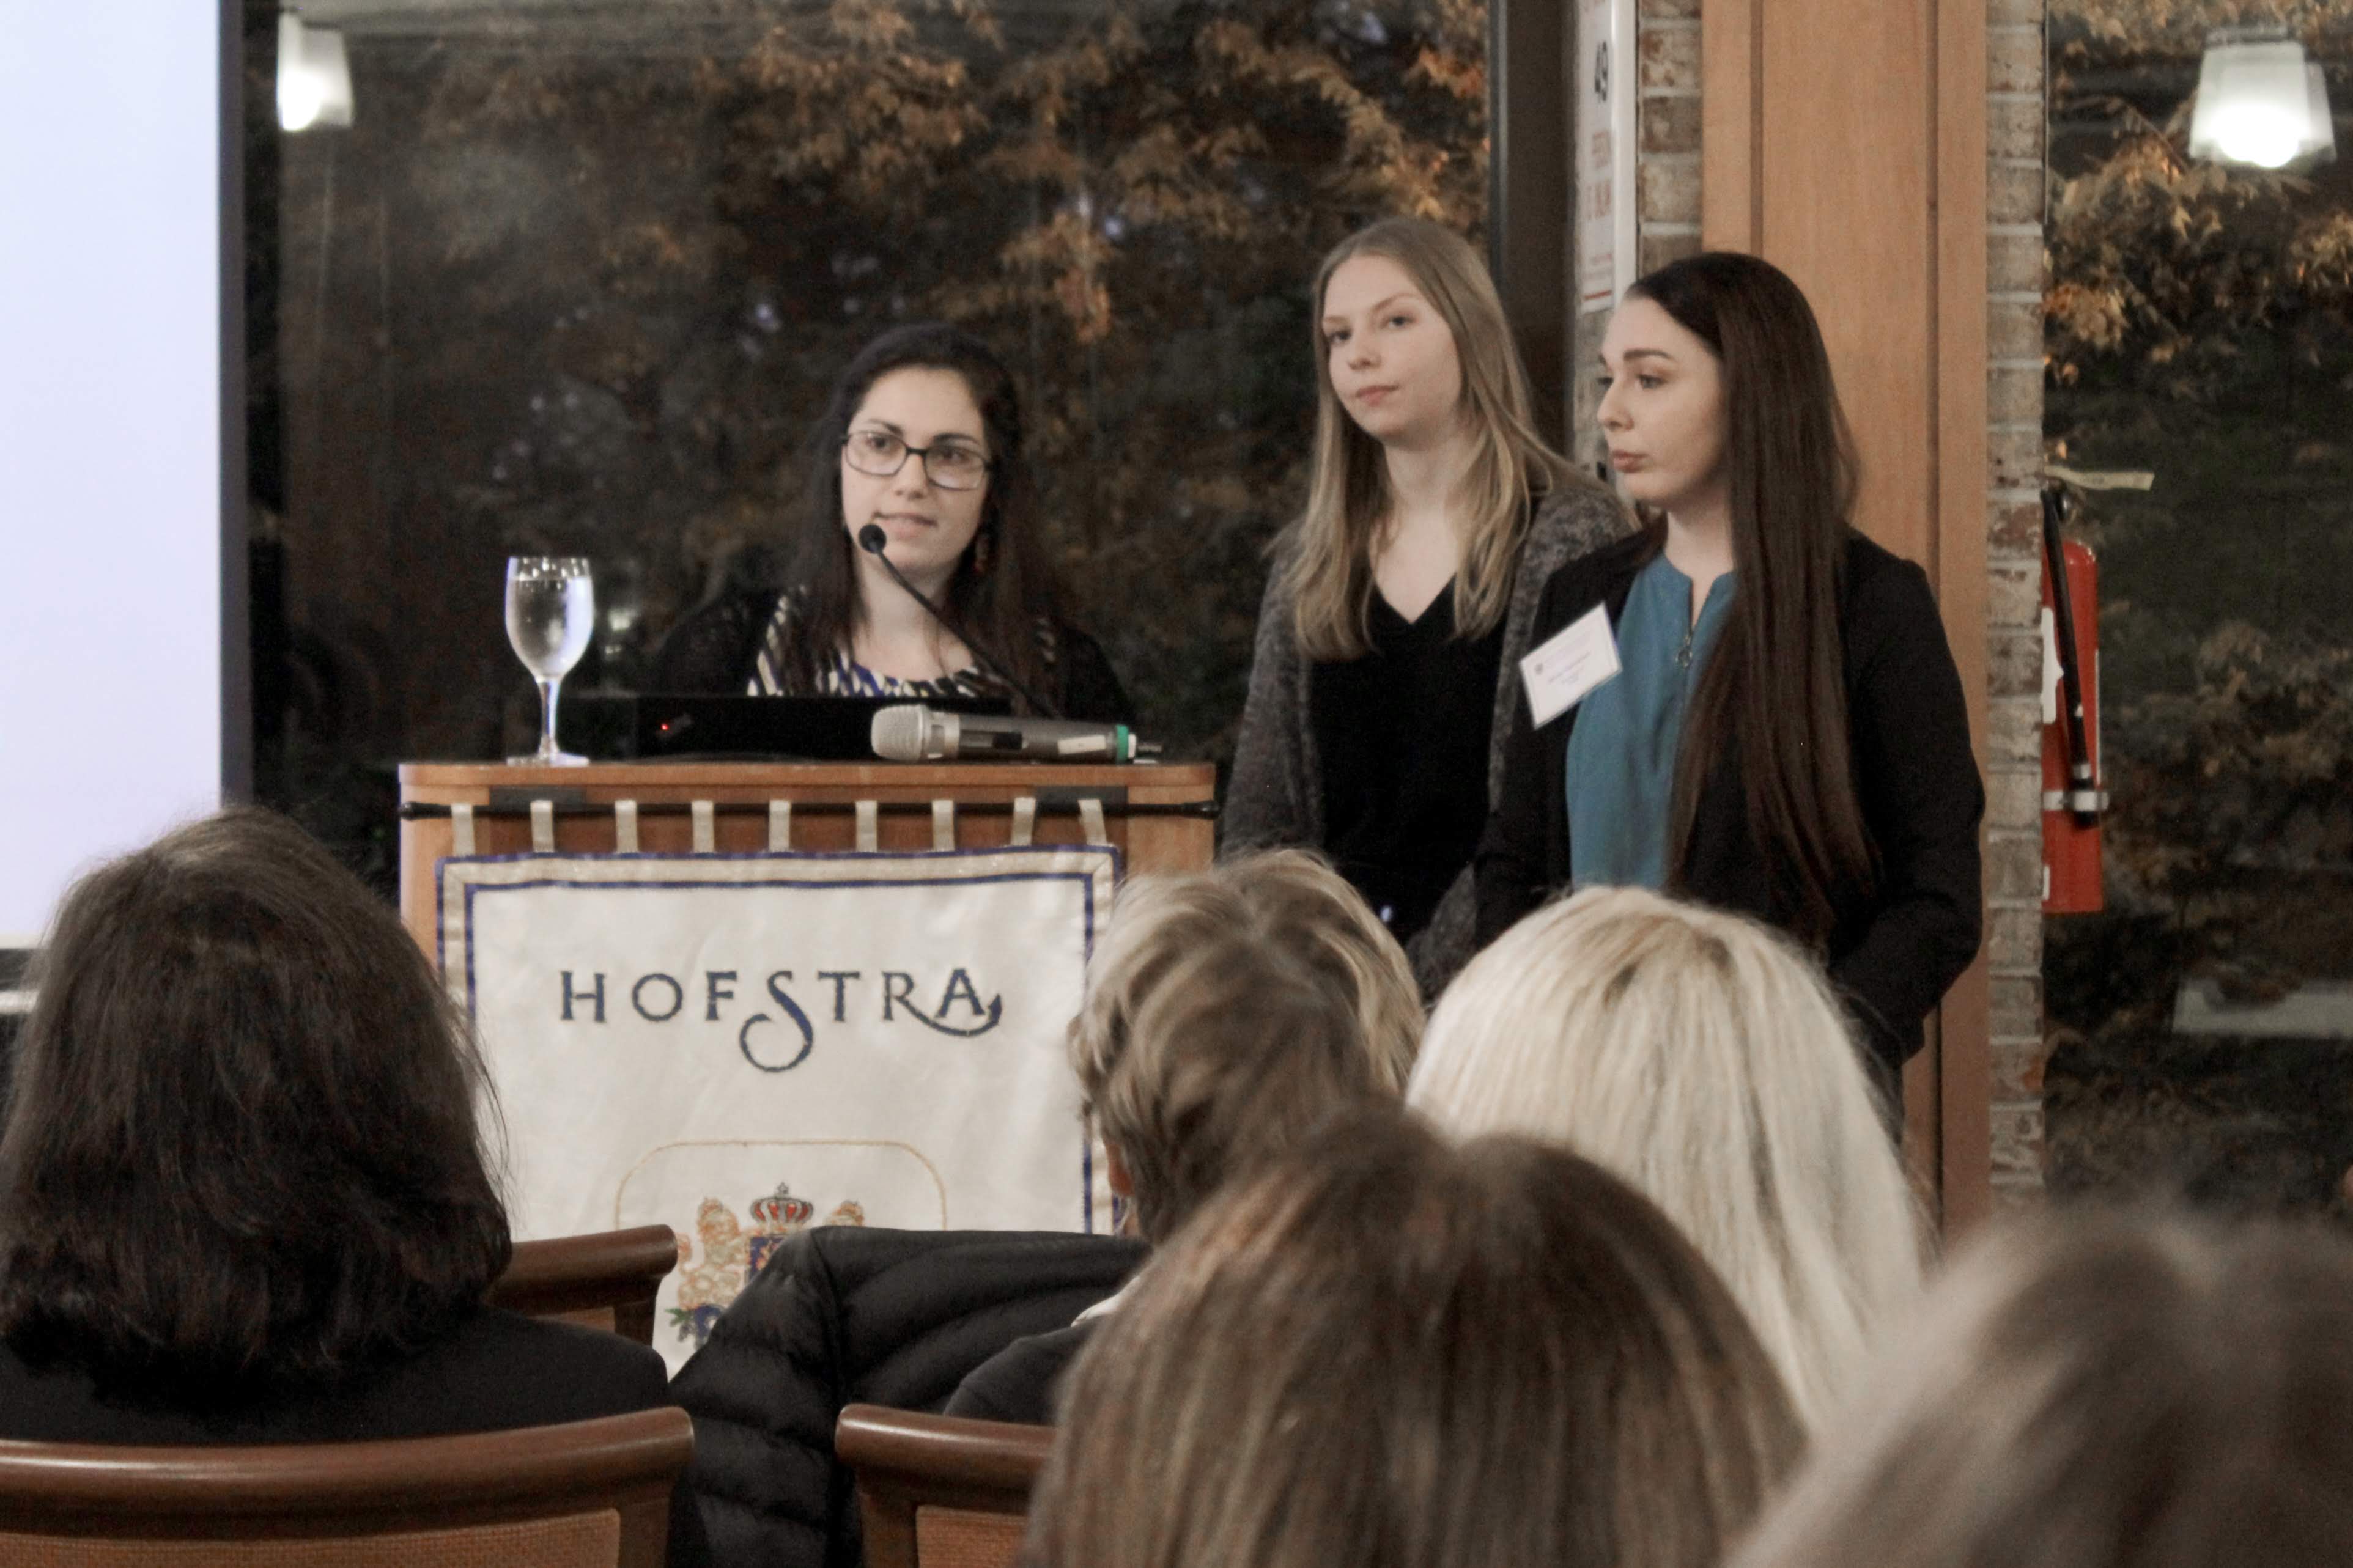 Three female students speaking at event